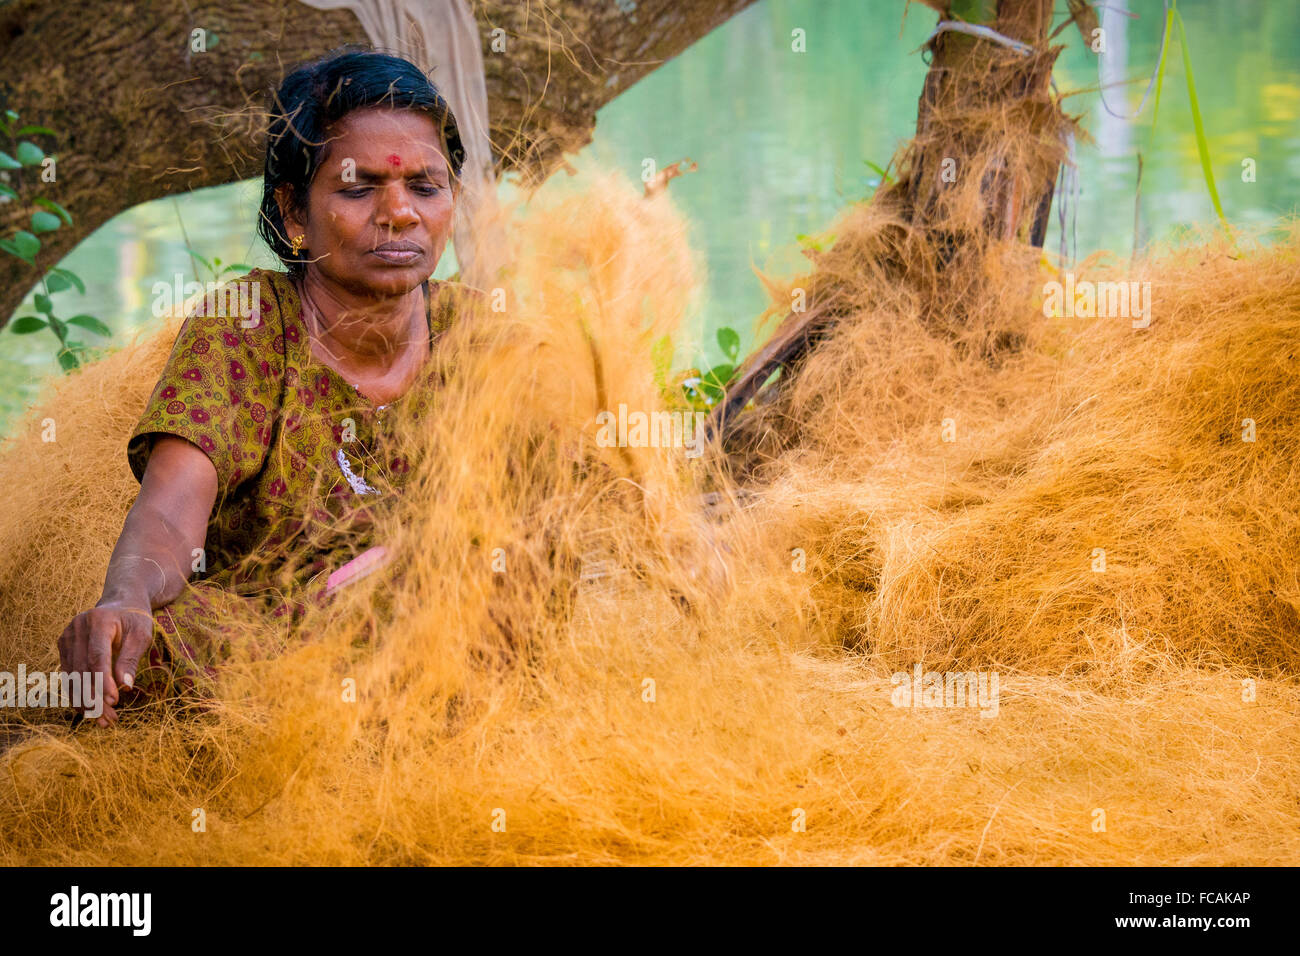 Indian woman separating the coir used for making rope Stock Photo